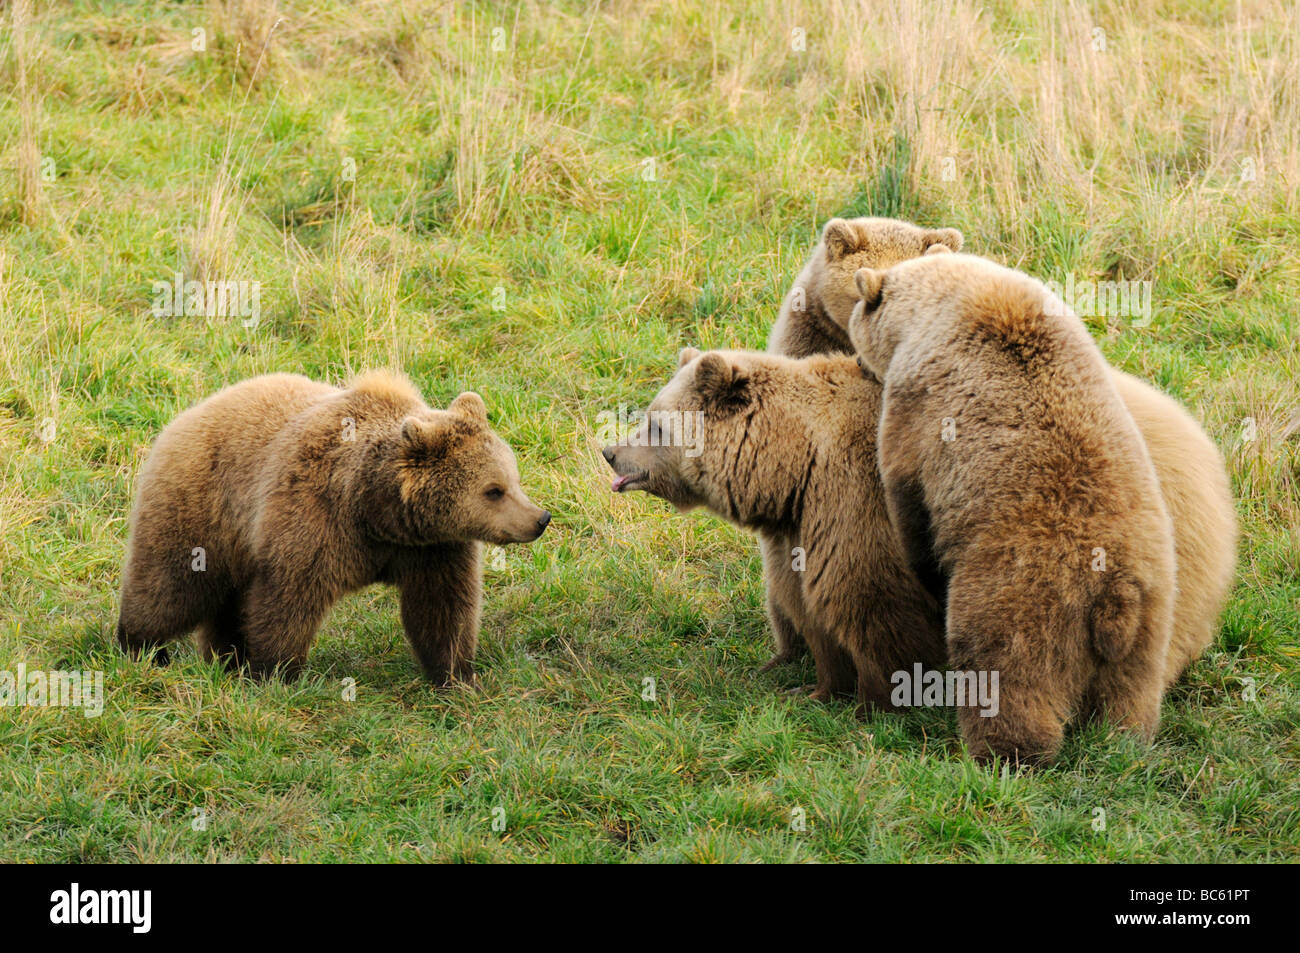 Brown bears (Ursus arctos) in forest, Bavaria, Germany Stock Photo